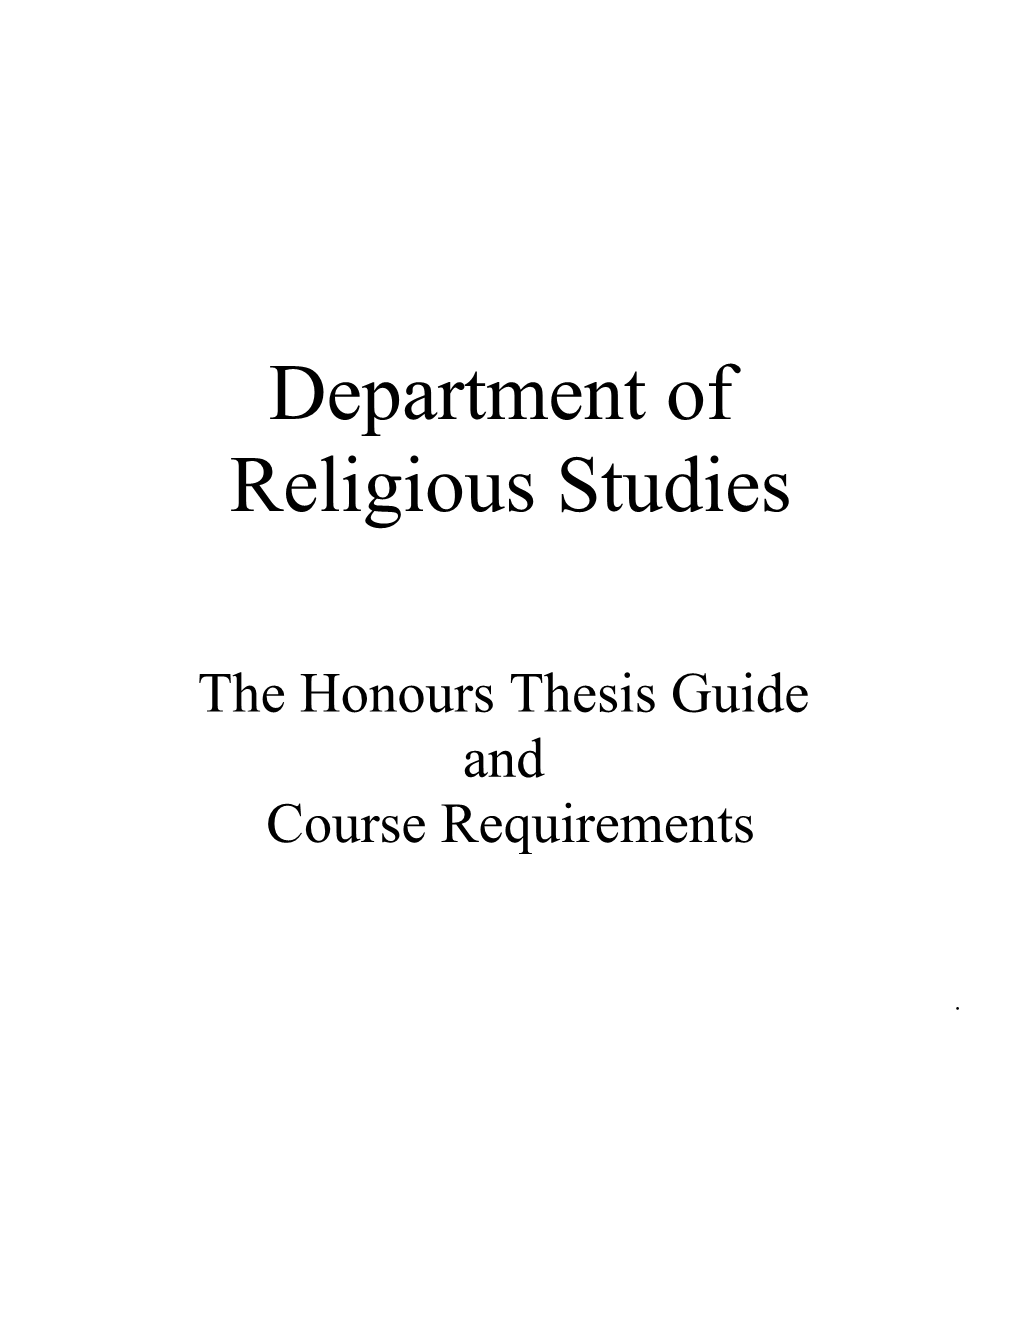 Honors Thesis/Project Handbook